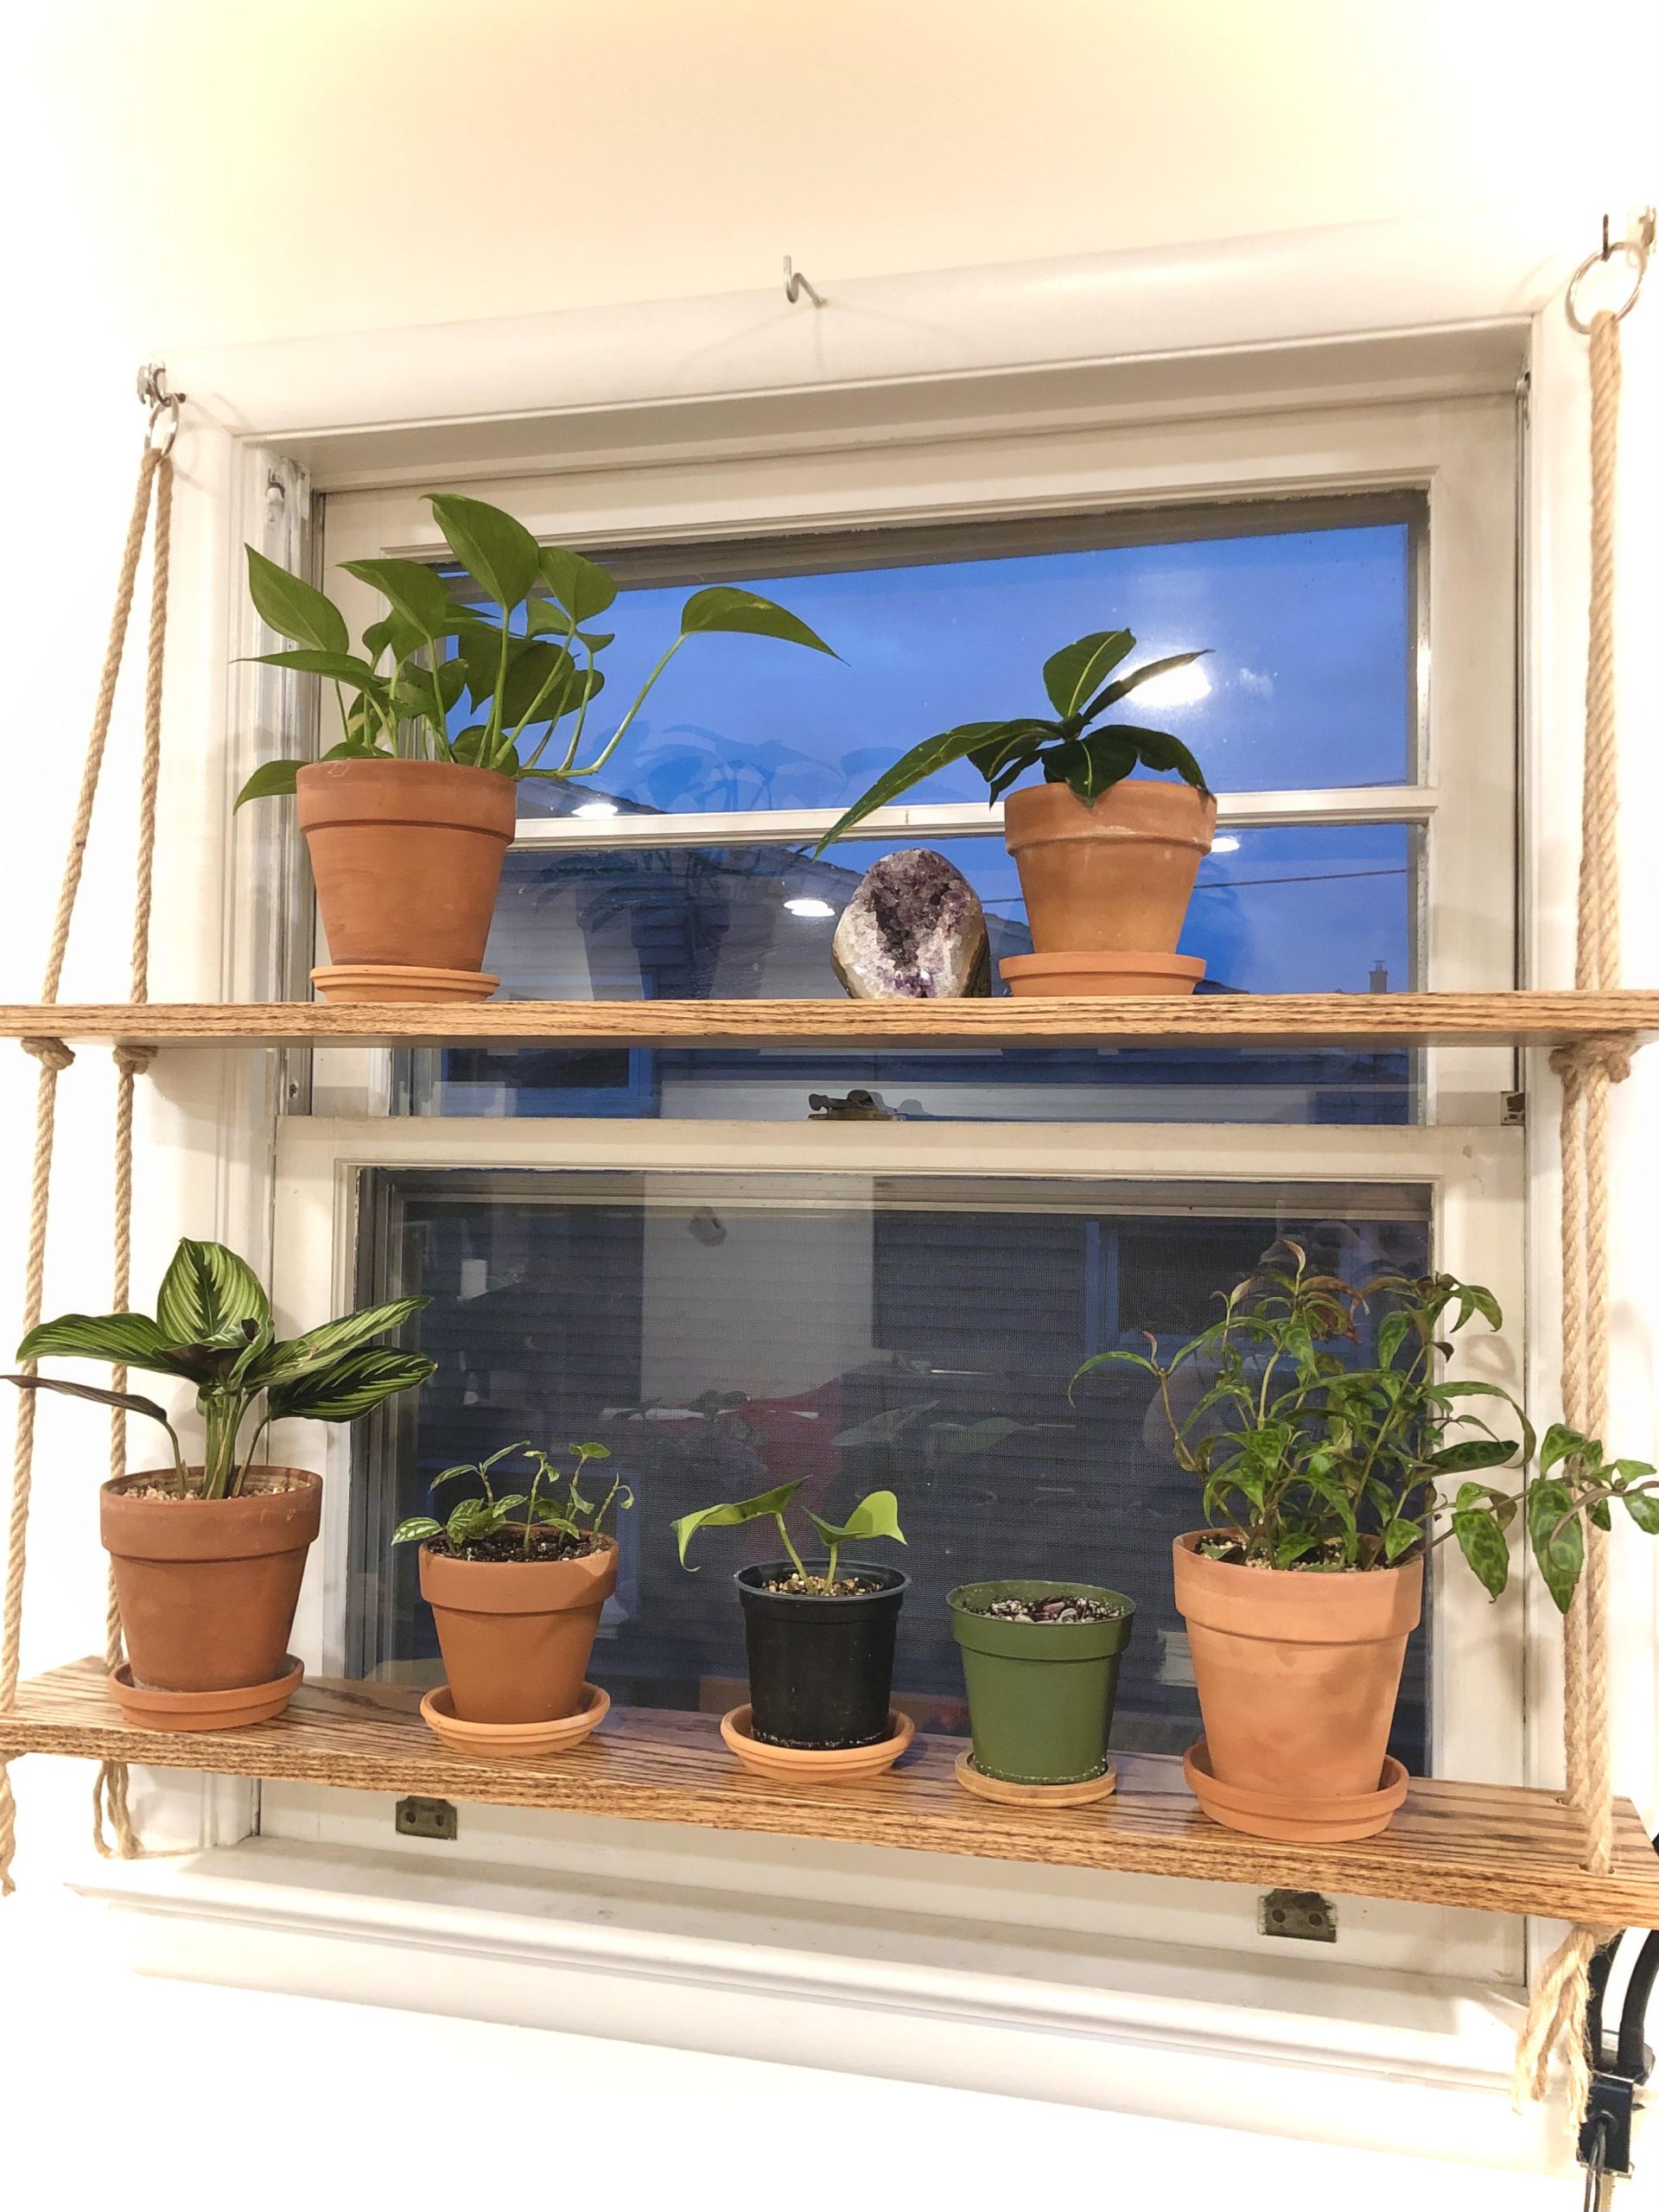 How to display plants in front of a window?